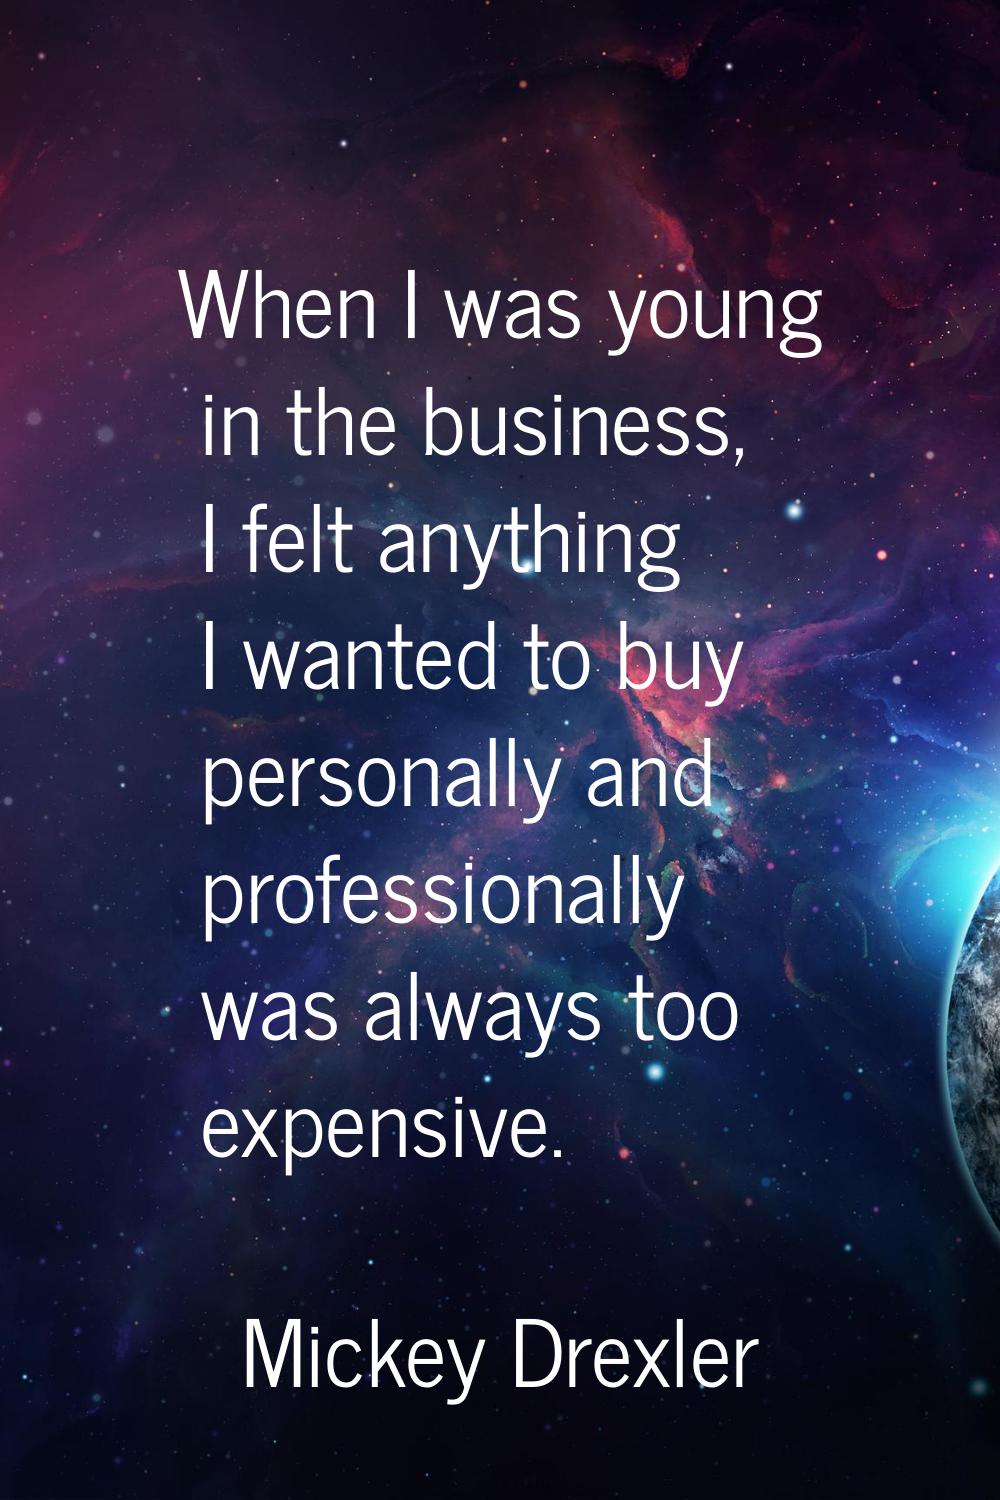 When I was young in the business, I felt anything I wanted to buy personally and professionally was